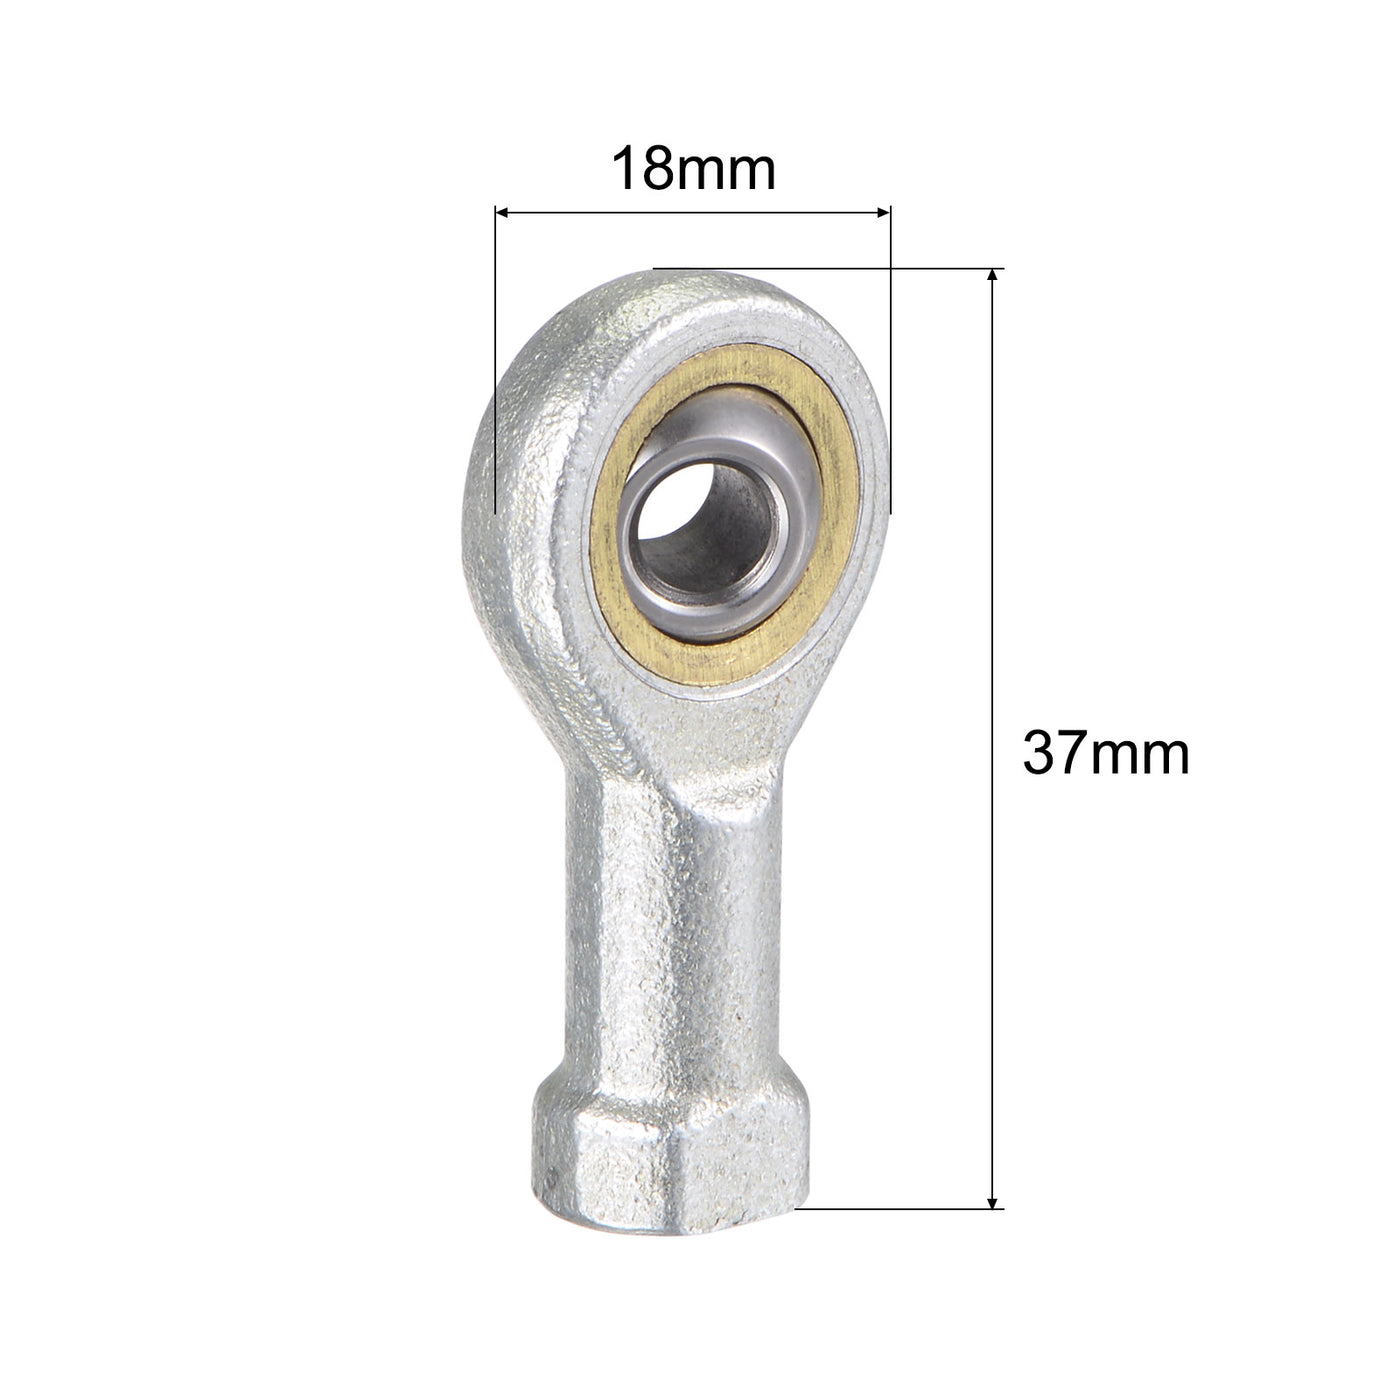 uxcell Uxcell SI5TK PHSA5 Rod End Bearing 5mm Bore M5x0.8 Right Hand Female Thread